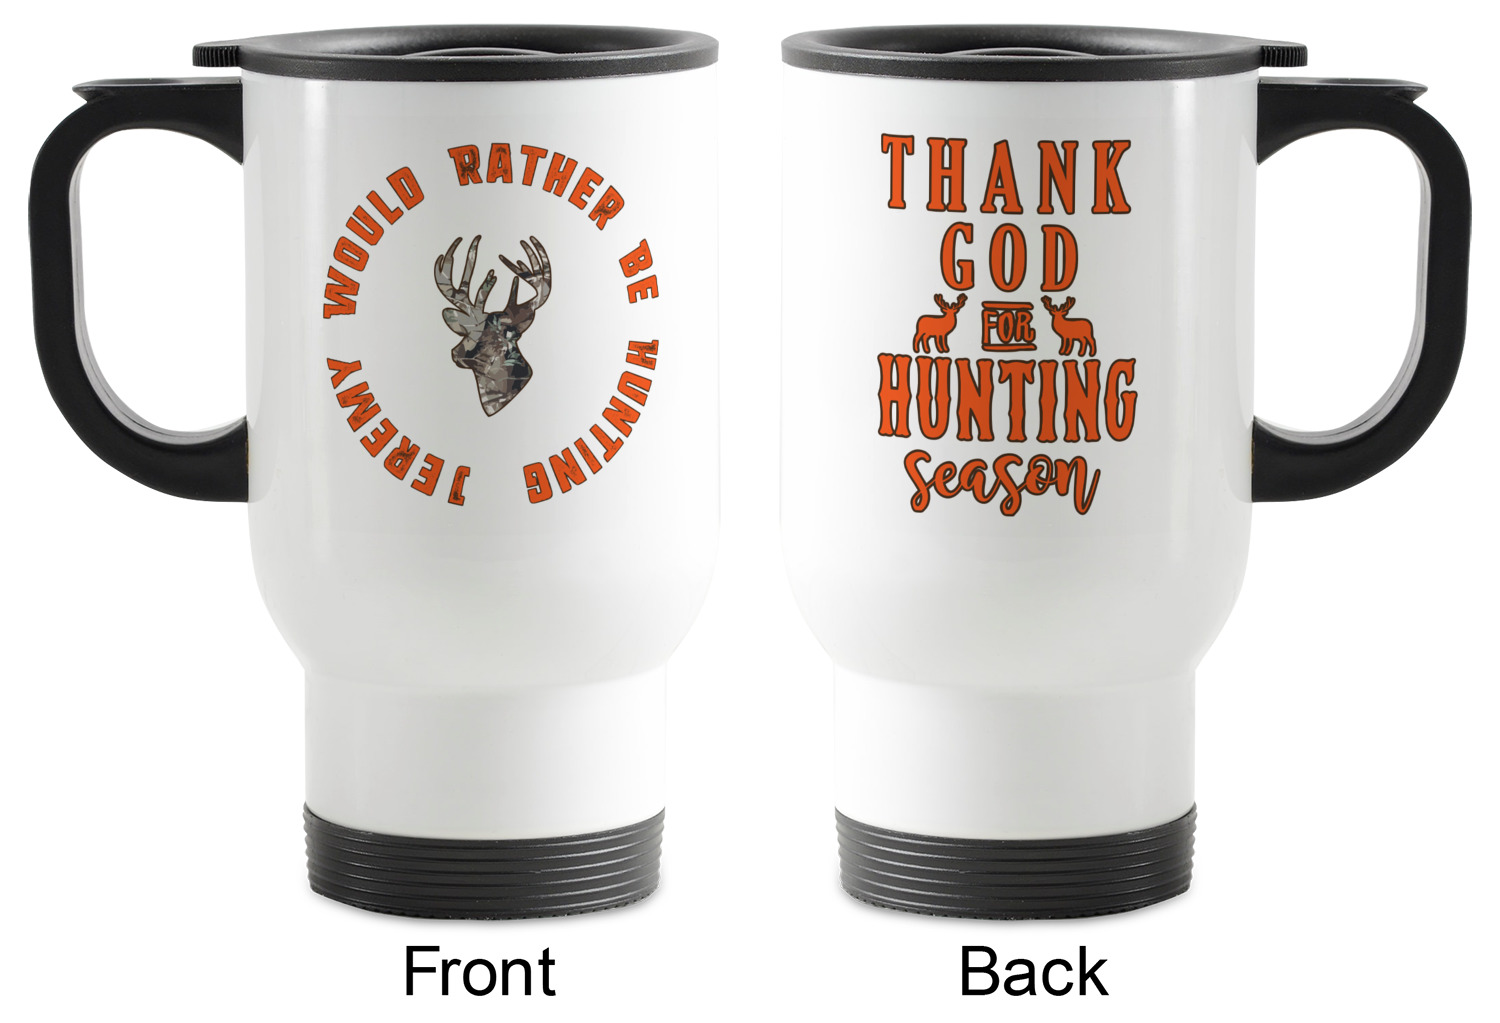 https://www.youcustomizeit.com/common/MAKE/2170399/Hunting-Camo-Stainless-Steel-Travel-Mug-with-Handle-Apvl.jpg?lm=1670591671